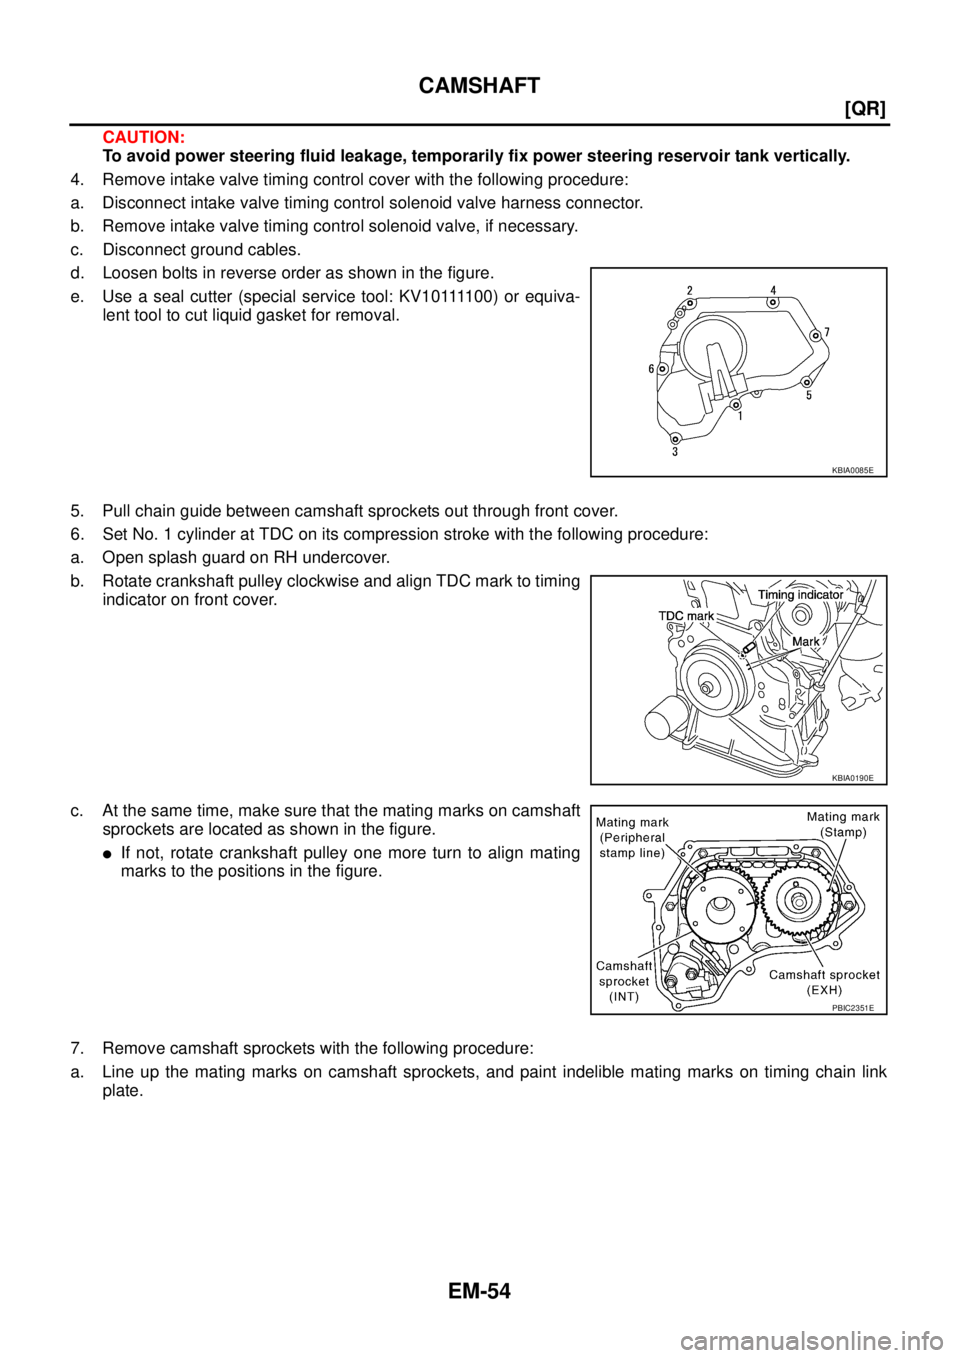 NISSAN X-TRAIL 2003  Service User Guide EM-54
[QR]
CAMSHAFT
 
CAUTION:
To avoid power steering fluid leakage, temporarily fix power steering reservoir tank vertically.
4. Remove intake valve timing control cover with the following procedure